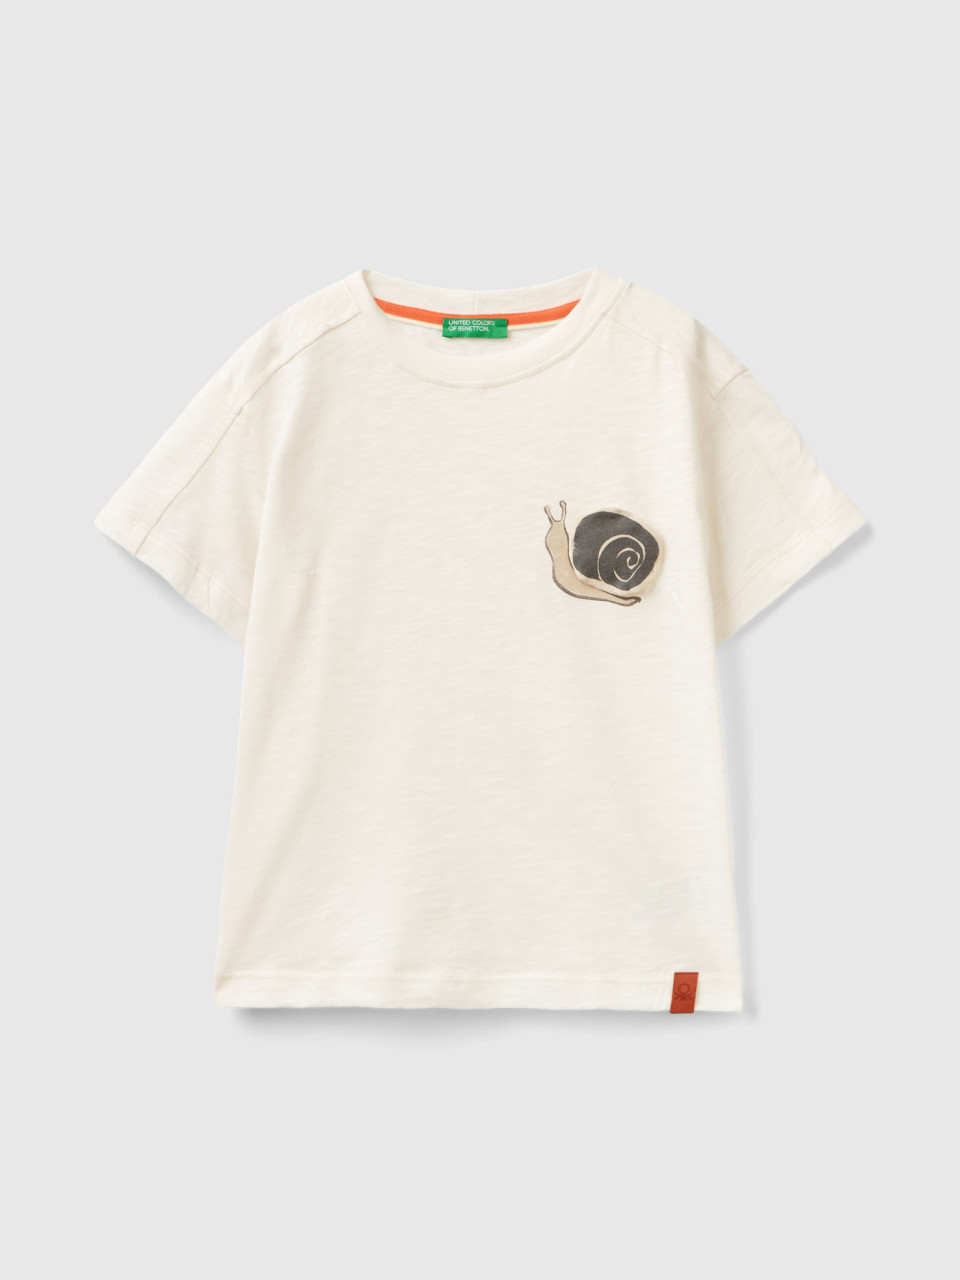 Benetton, T-shirt With Print And Applique, Creamy White, Kids